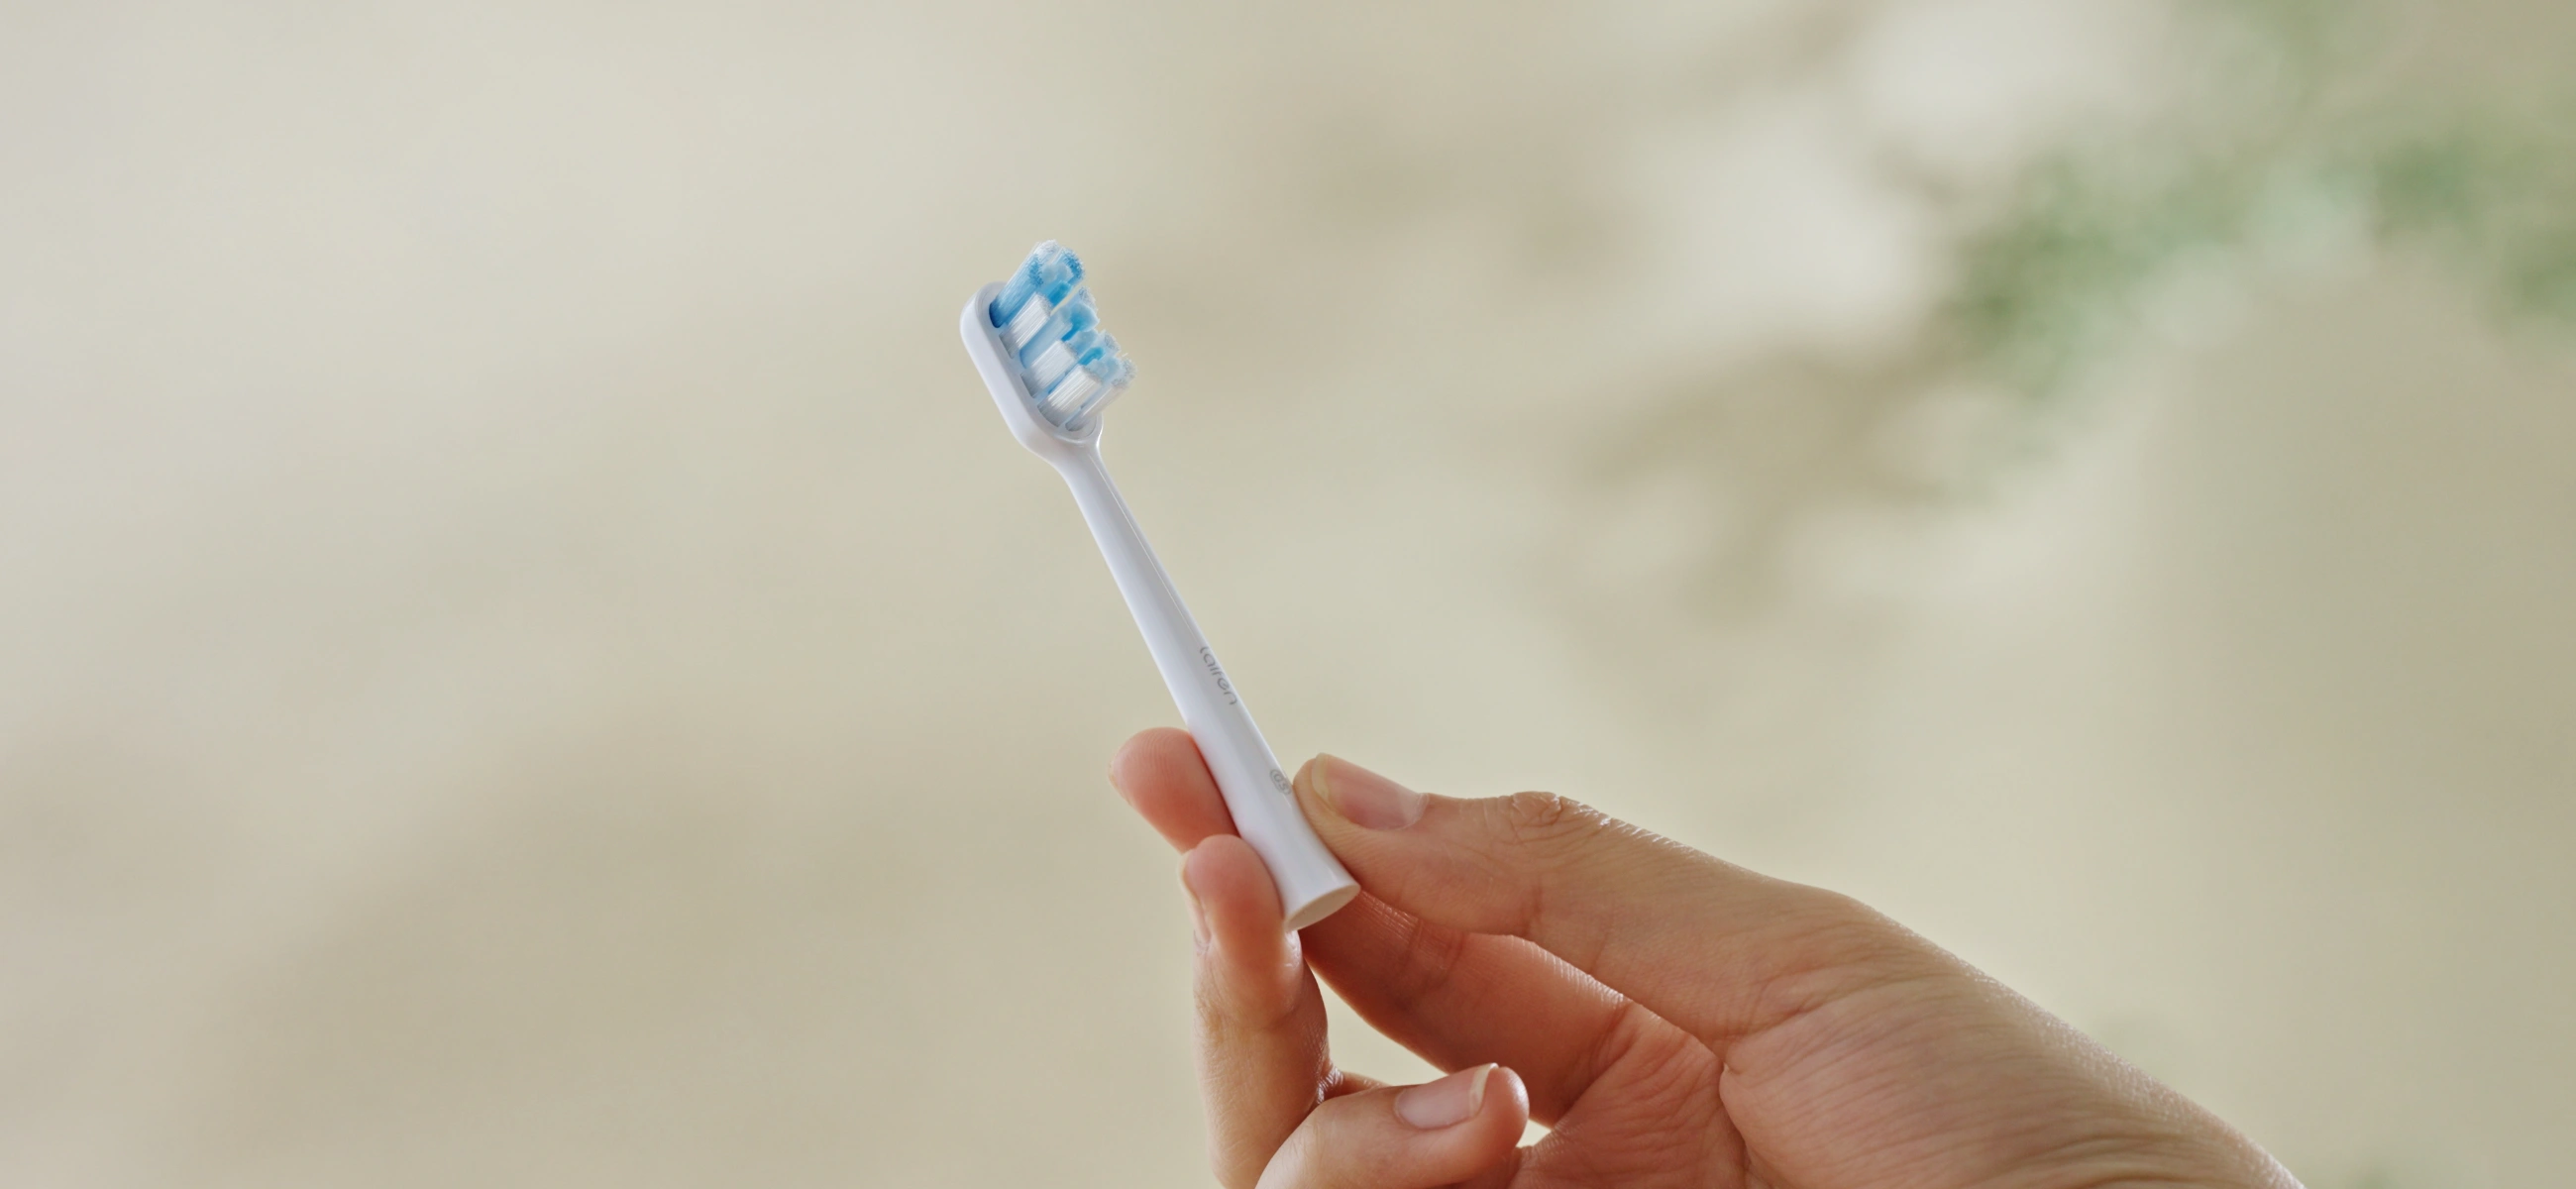 How often do you have to change electric toothbrush heads